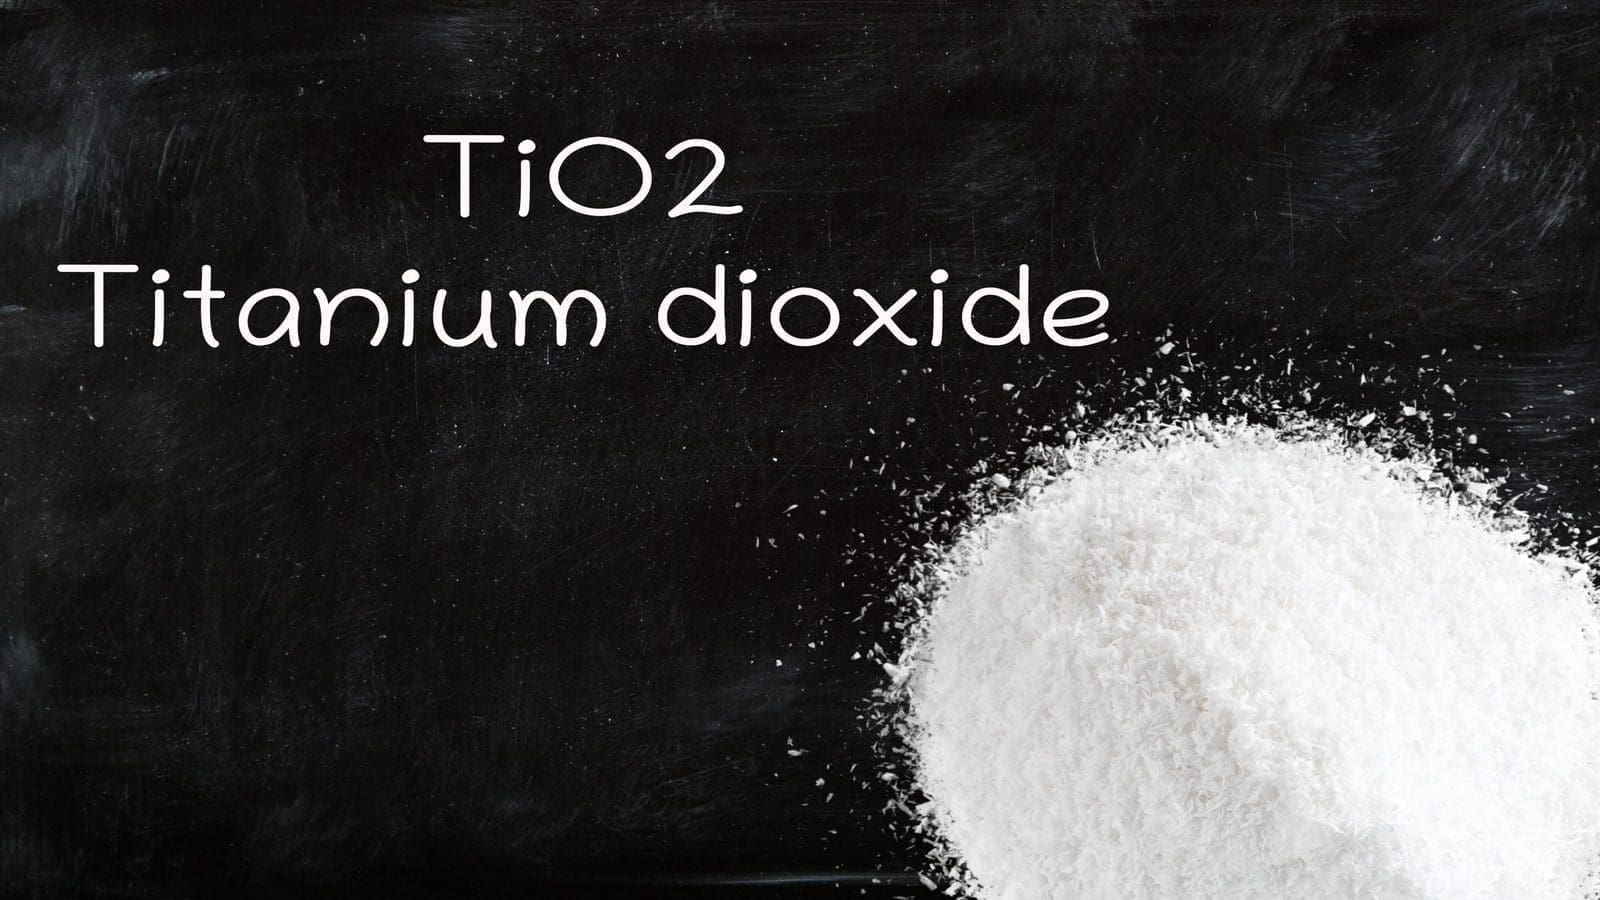 EU bans the use of titanium dioxide prompting firms to innovate alternative options